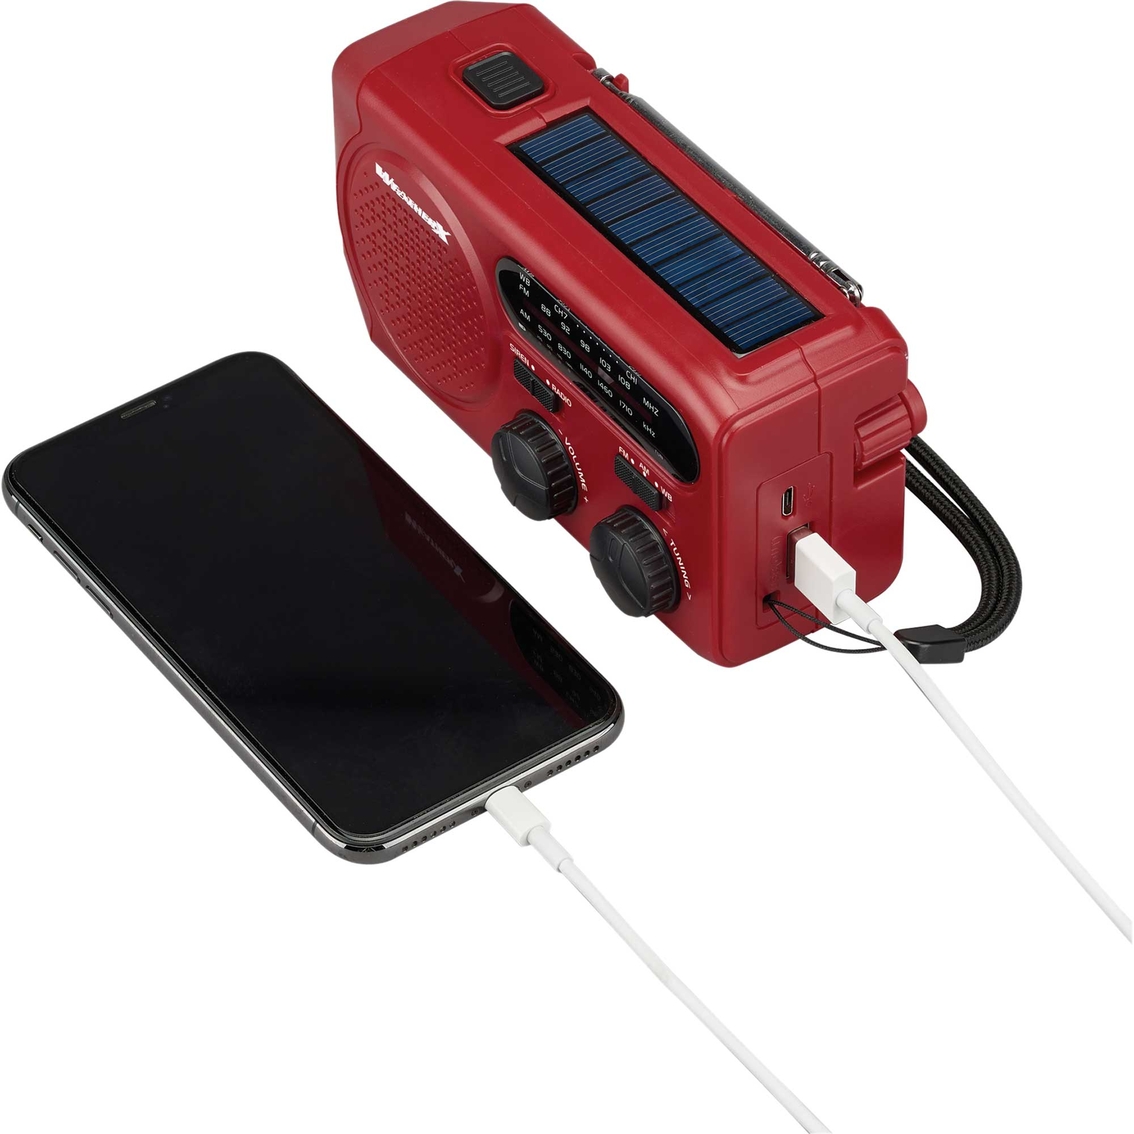 WeatherX WR281R Flashlight with Solar Power and Bluetooth Speaker - Image 2 of 3